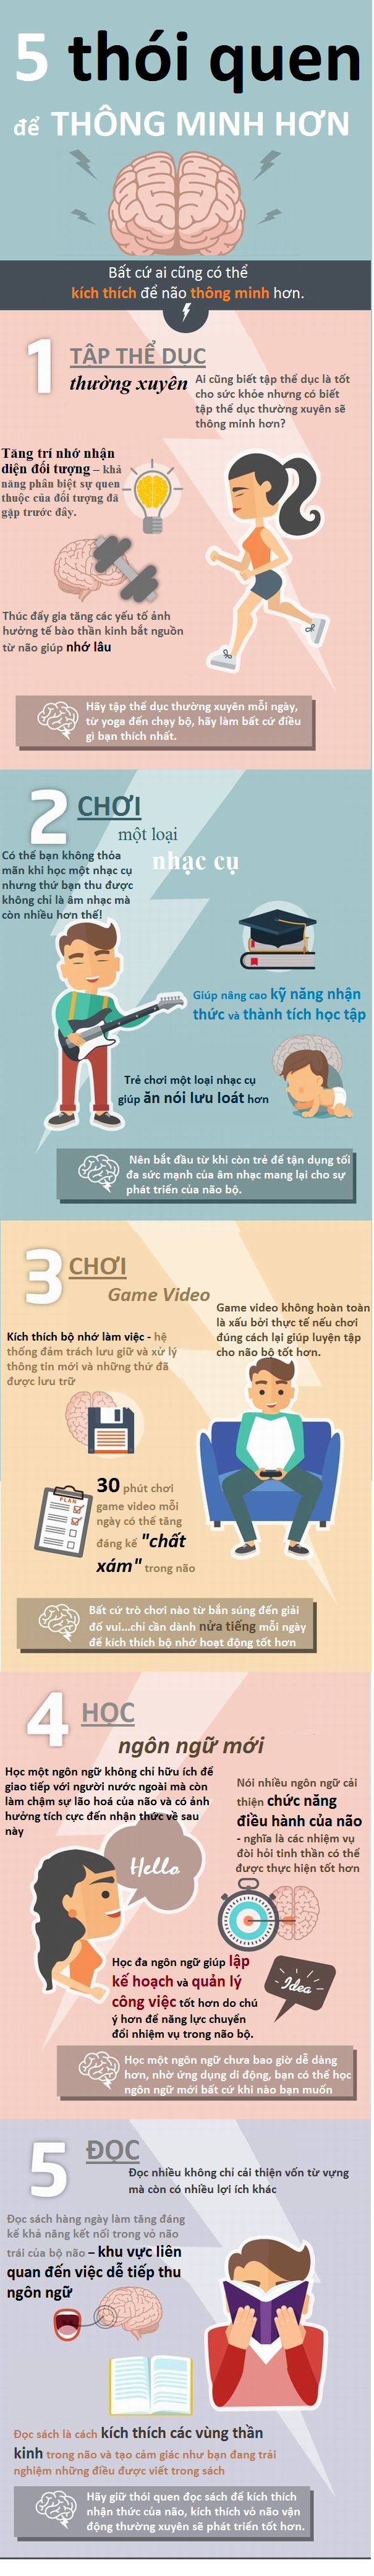 infographic 5 cach don gian kich thich nao giup tre thong minh hon